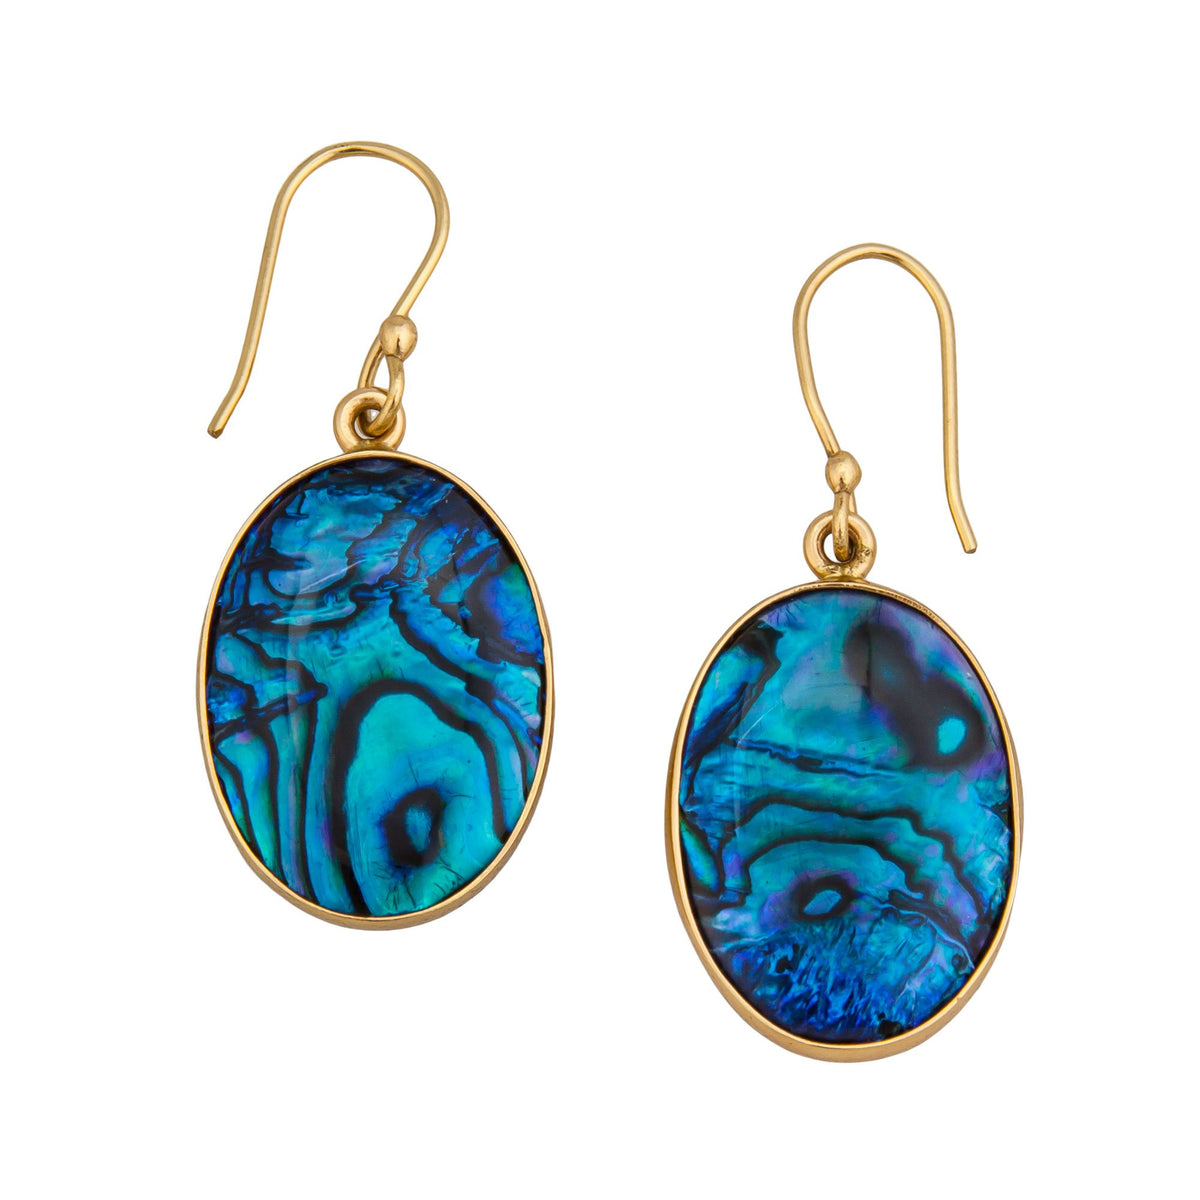 Charles Albert Jewelry - Alchemia Blue Abalone Earrings - Front View